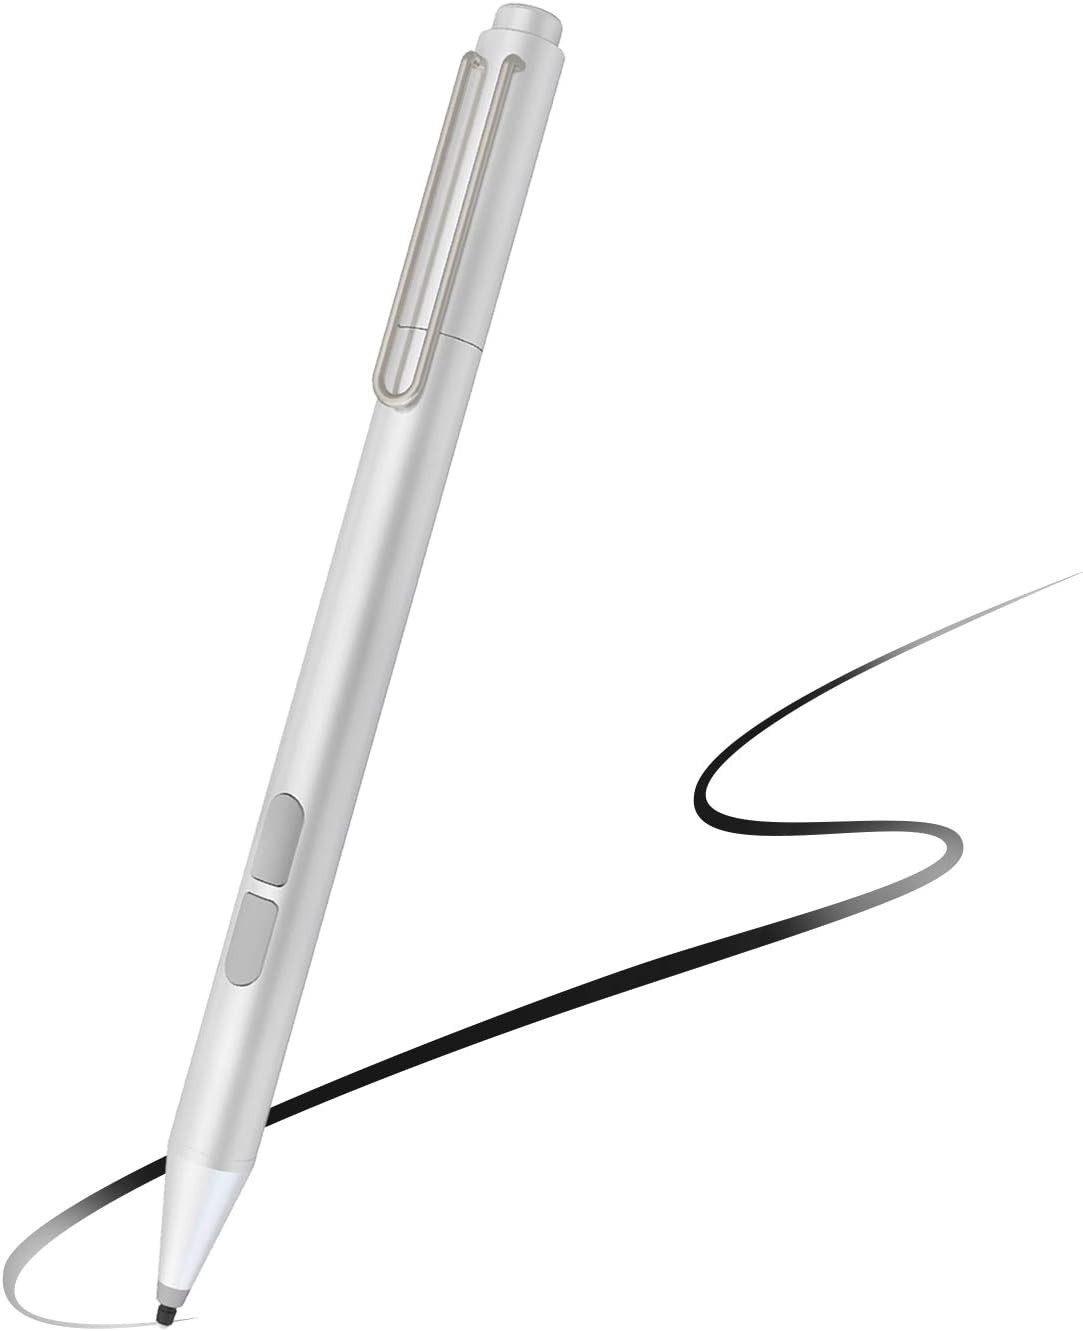 Uogic Pen for Microsoft Surface, Palm Rejection, 1024 [...]